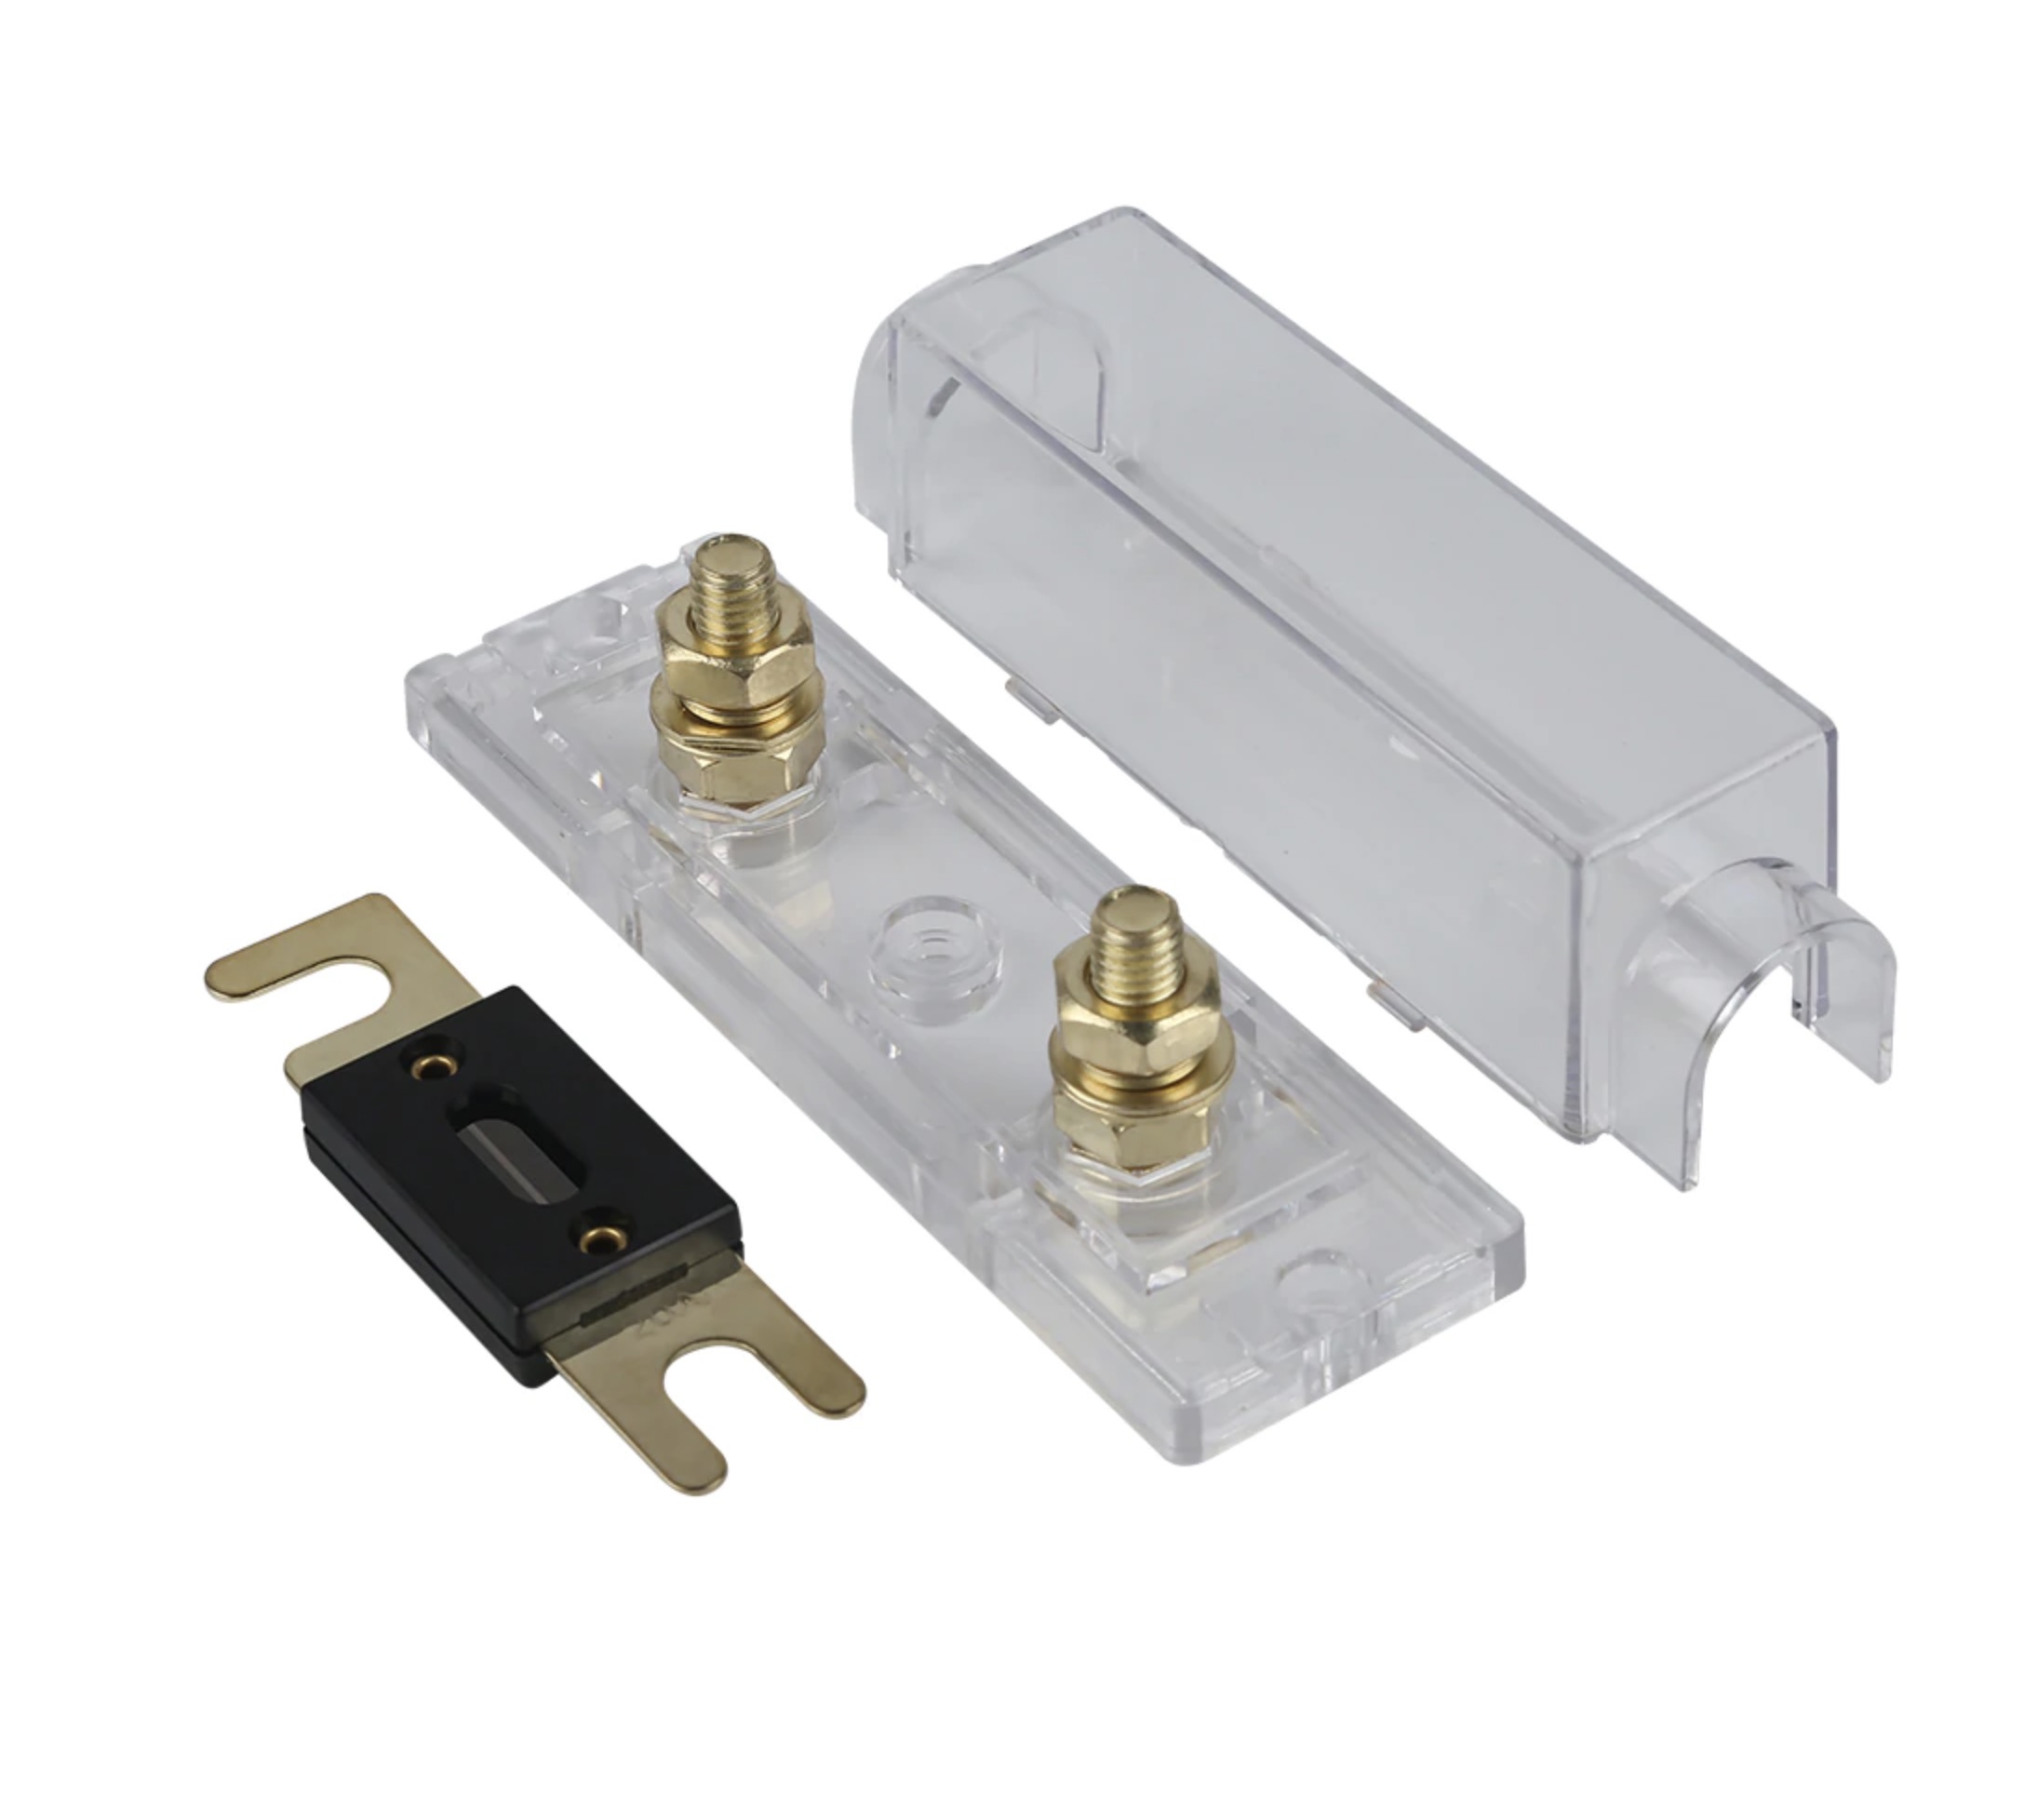 ANL Electrical Protection Fuse Holder